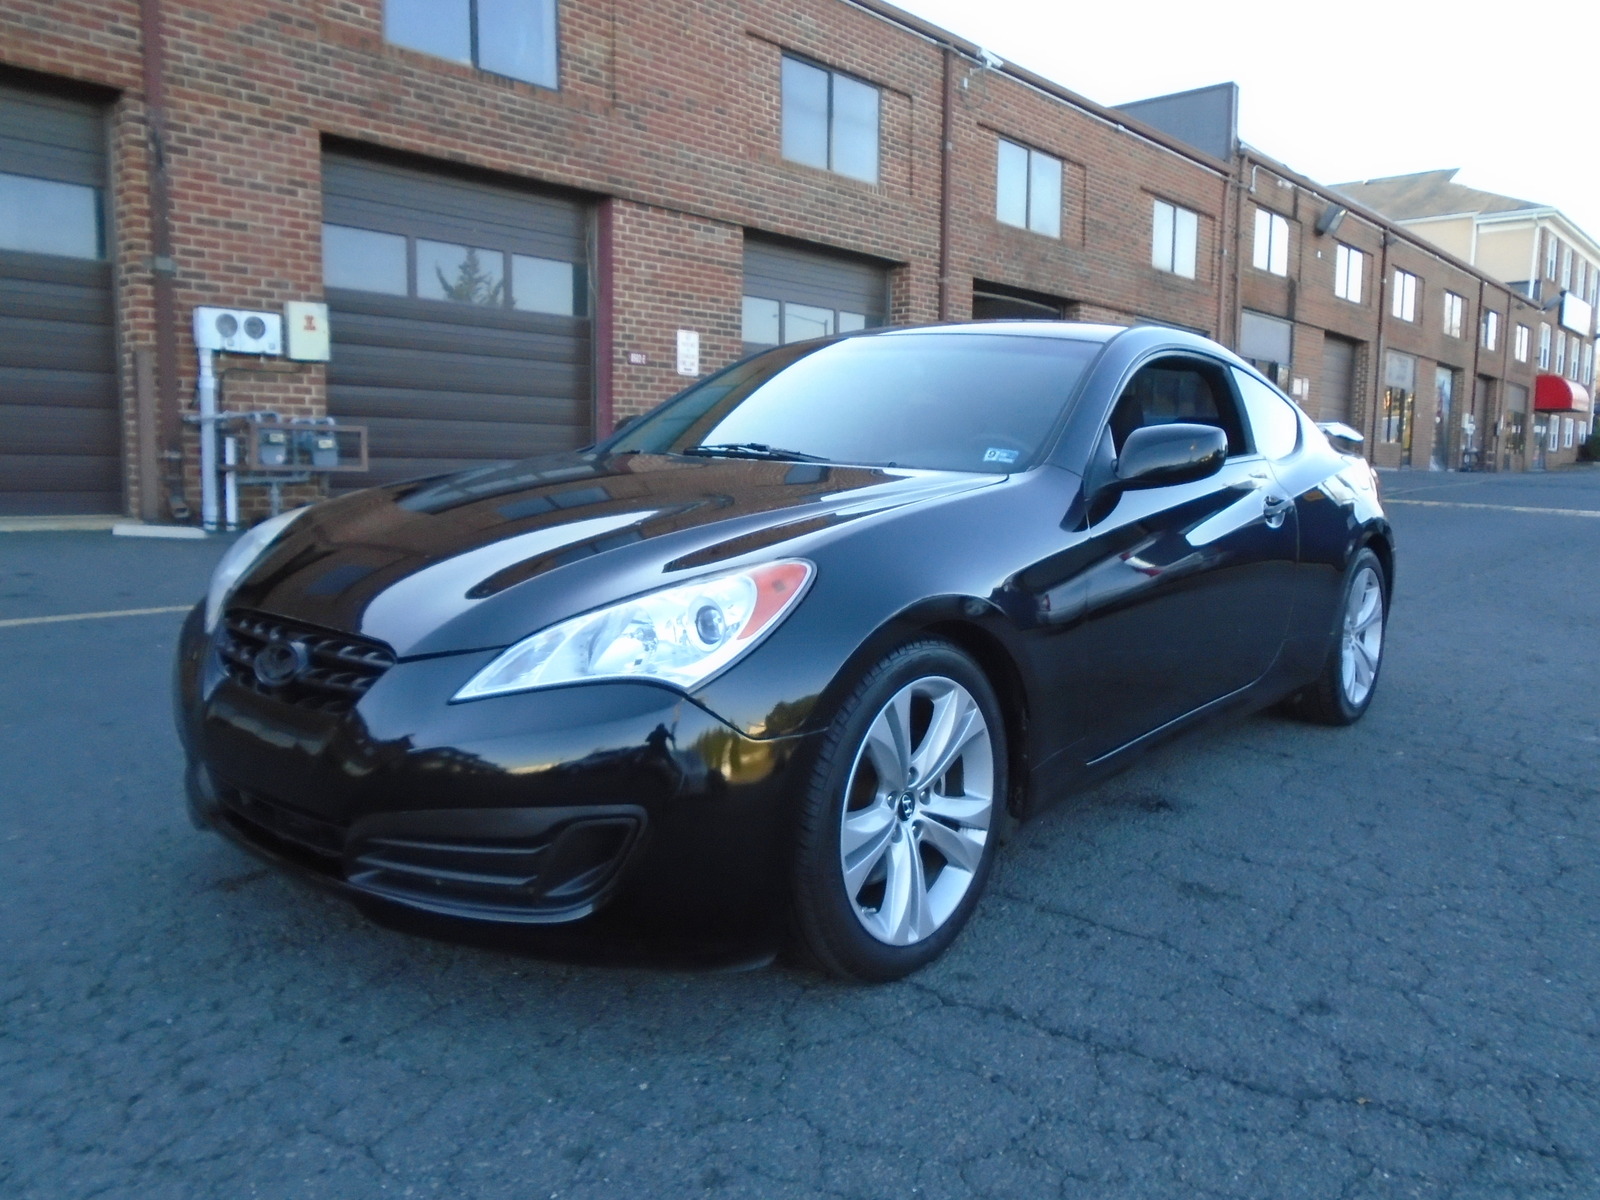 Used 2011 Hyundai Genesis Coupe for Sale Right Now - Autotrader